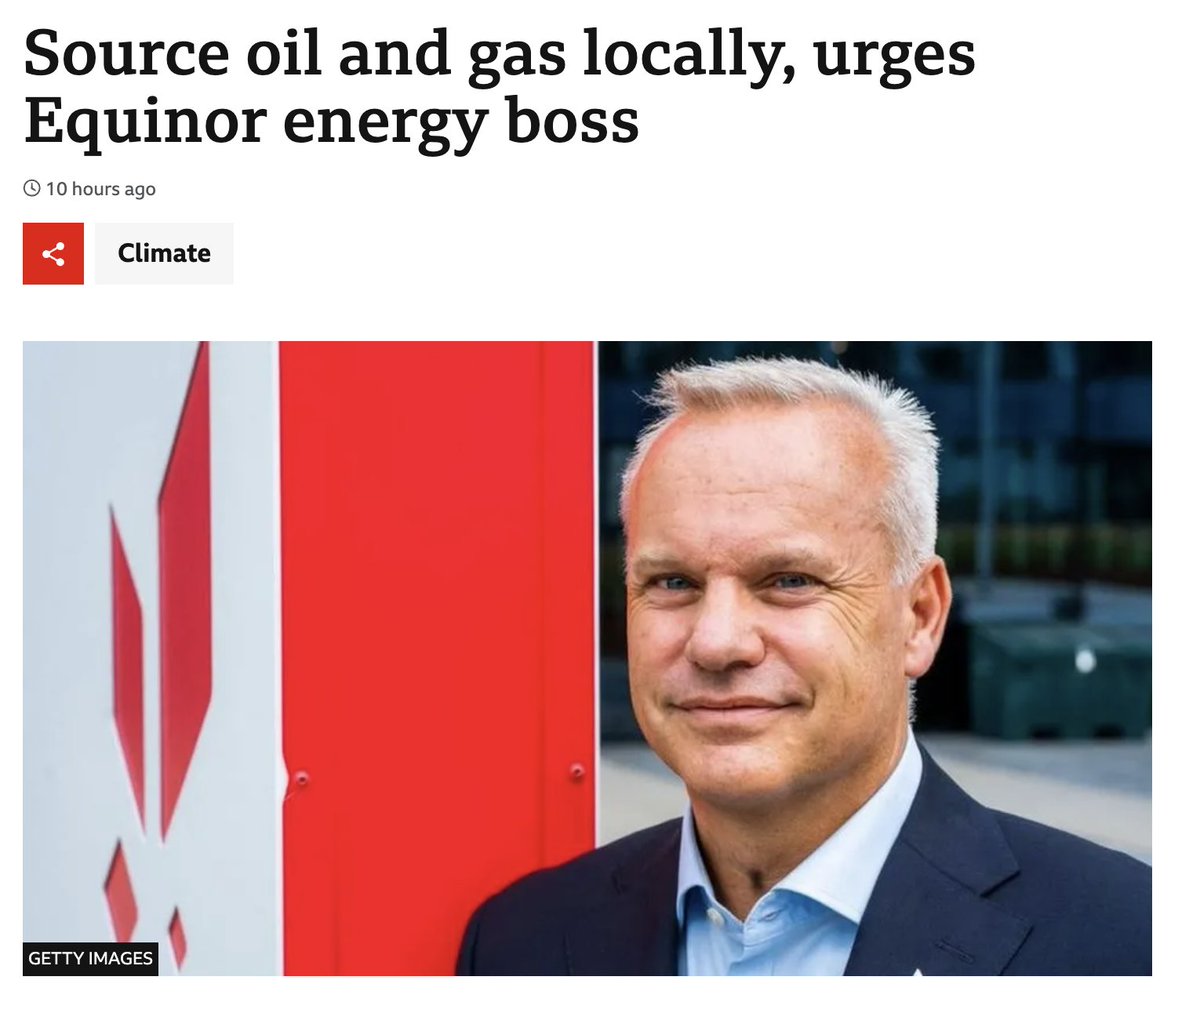 The earth has crossed 1.5C warming for an entire year and @Equinor is calling for more drilling 🤯 Oil from Rosebank is likely to be exported for profit and will do nothing to lower energy bills. It's a scam. Real energy security means getting off oil & gas.